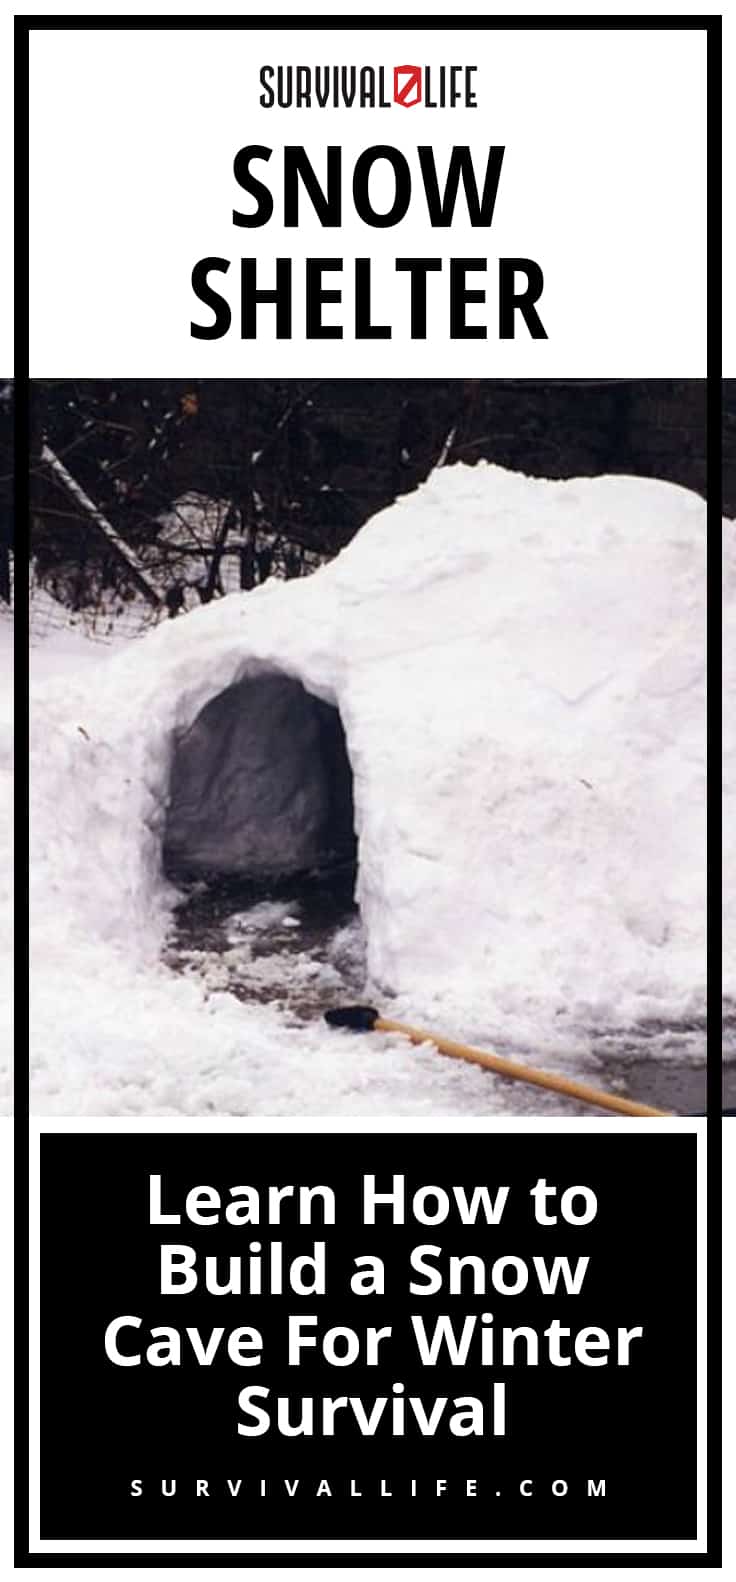 Snow Shelter: Learn How to Build a Snow Cave For Winter Survival